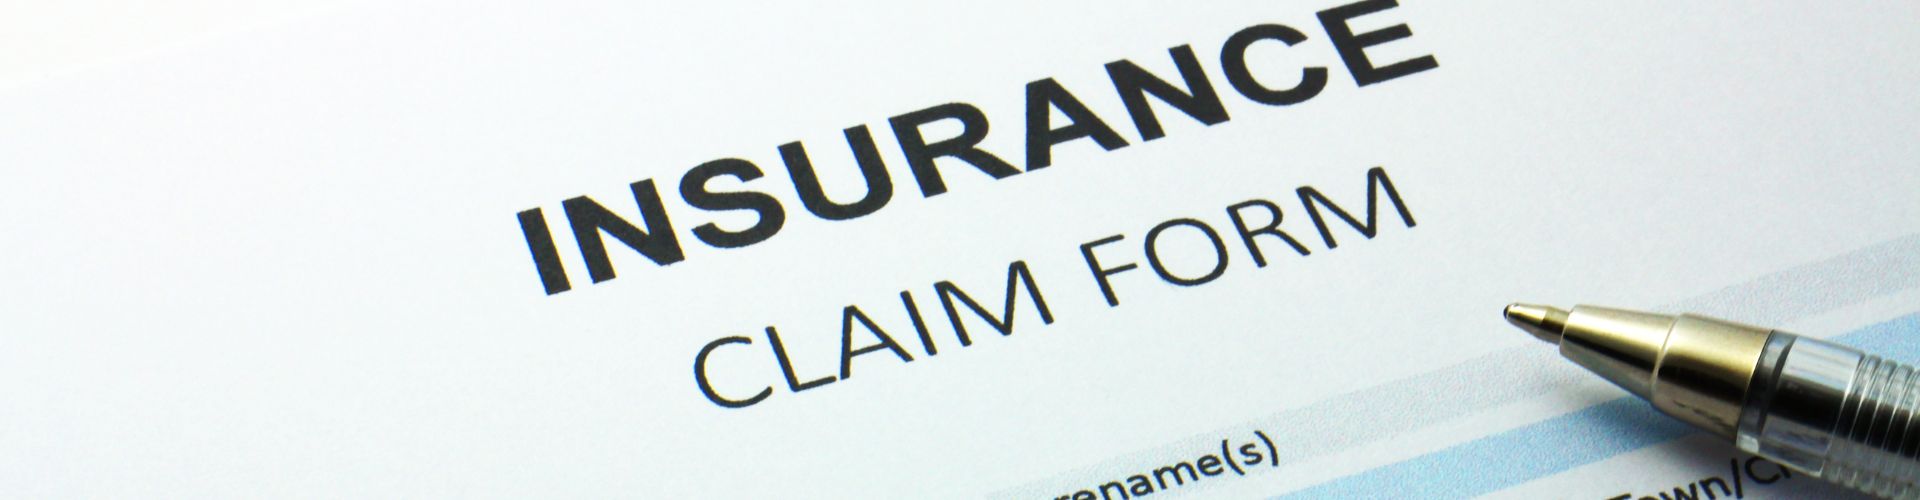 blank insurance claim form with a pen